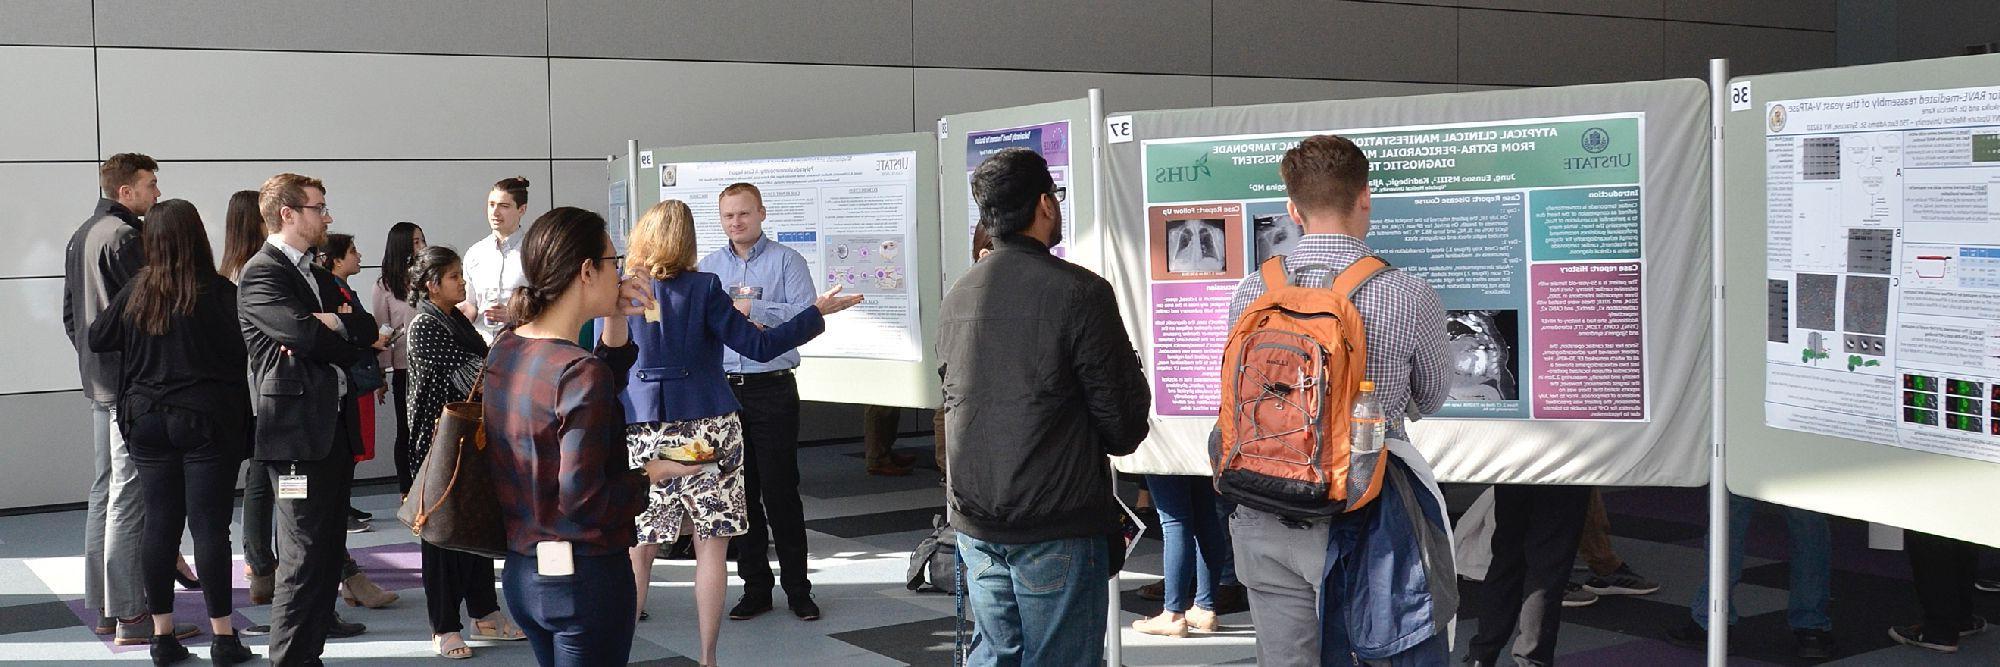 Research poster presentations